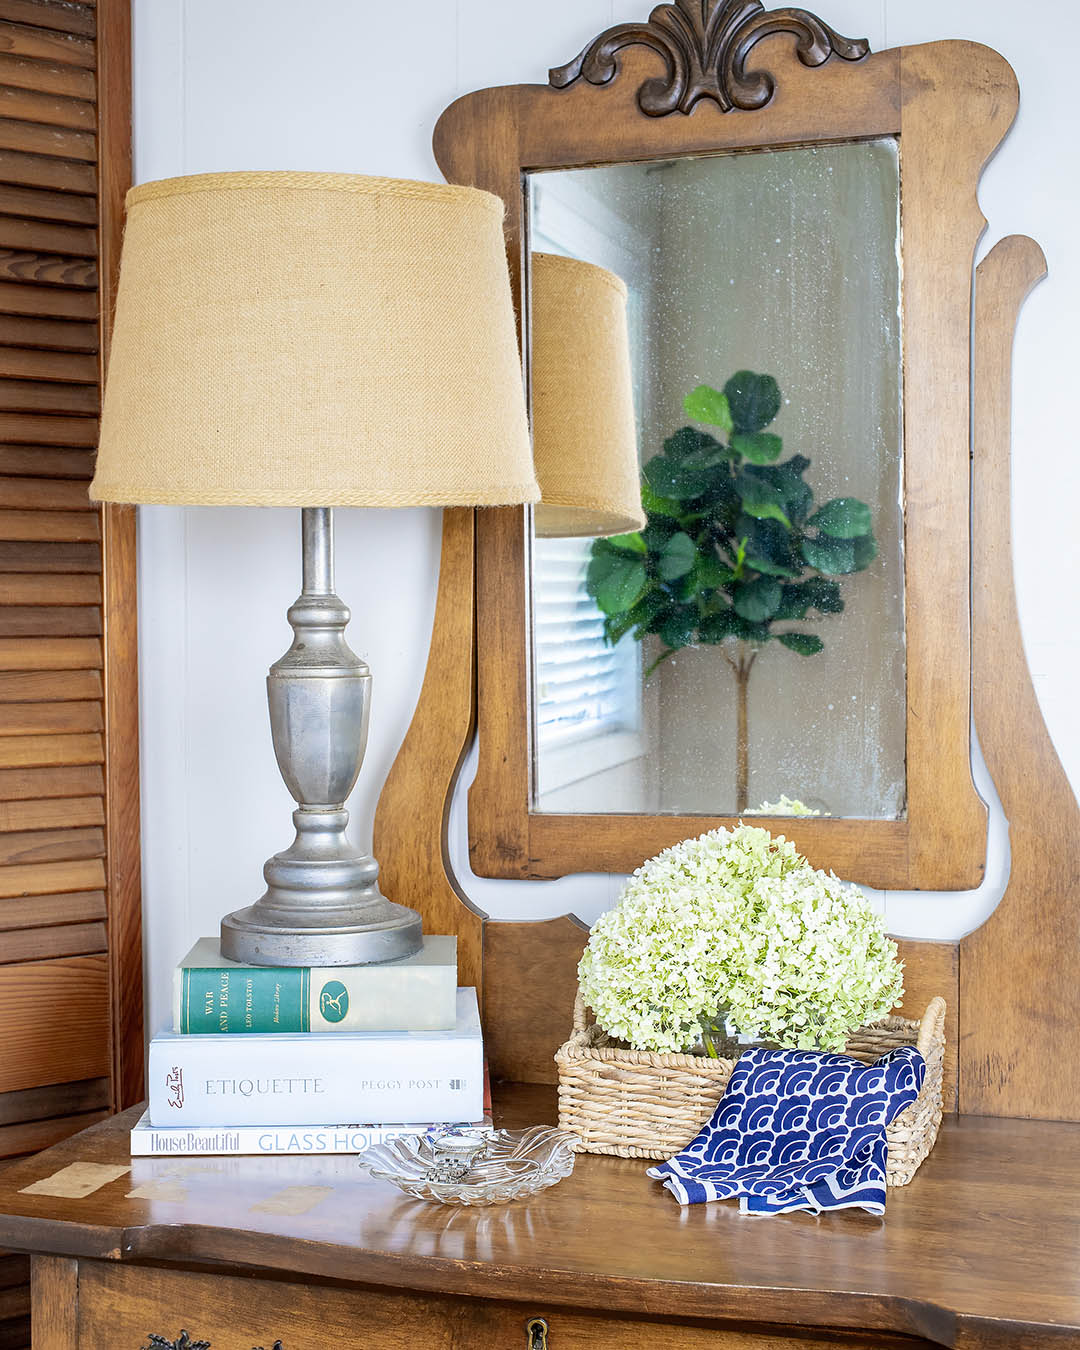 I've been building up my collection of beautiful books to fill out the living room bookshelves we've been working on and the thrift store has been a great resource! Here are some ideas for decorating with thrift store books!